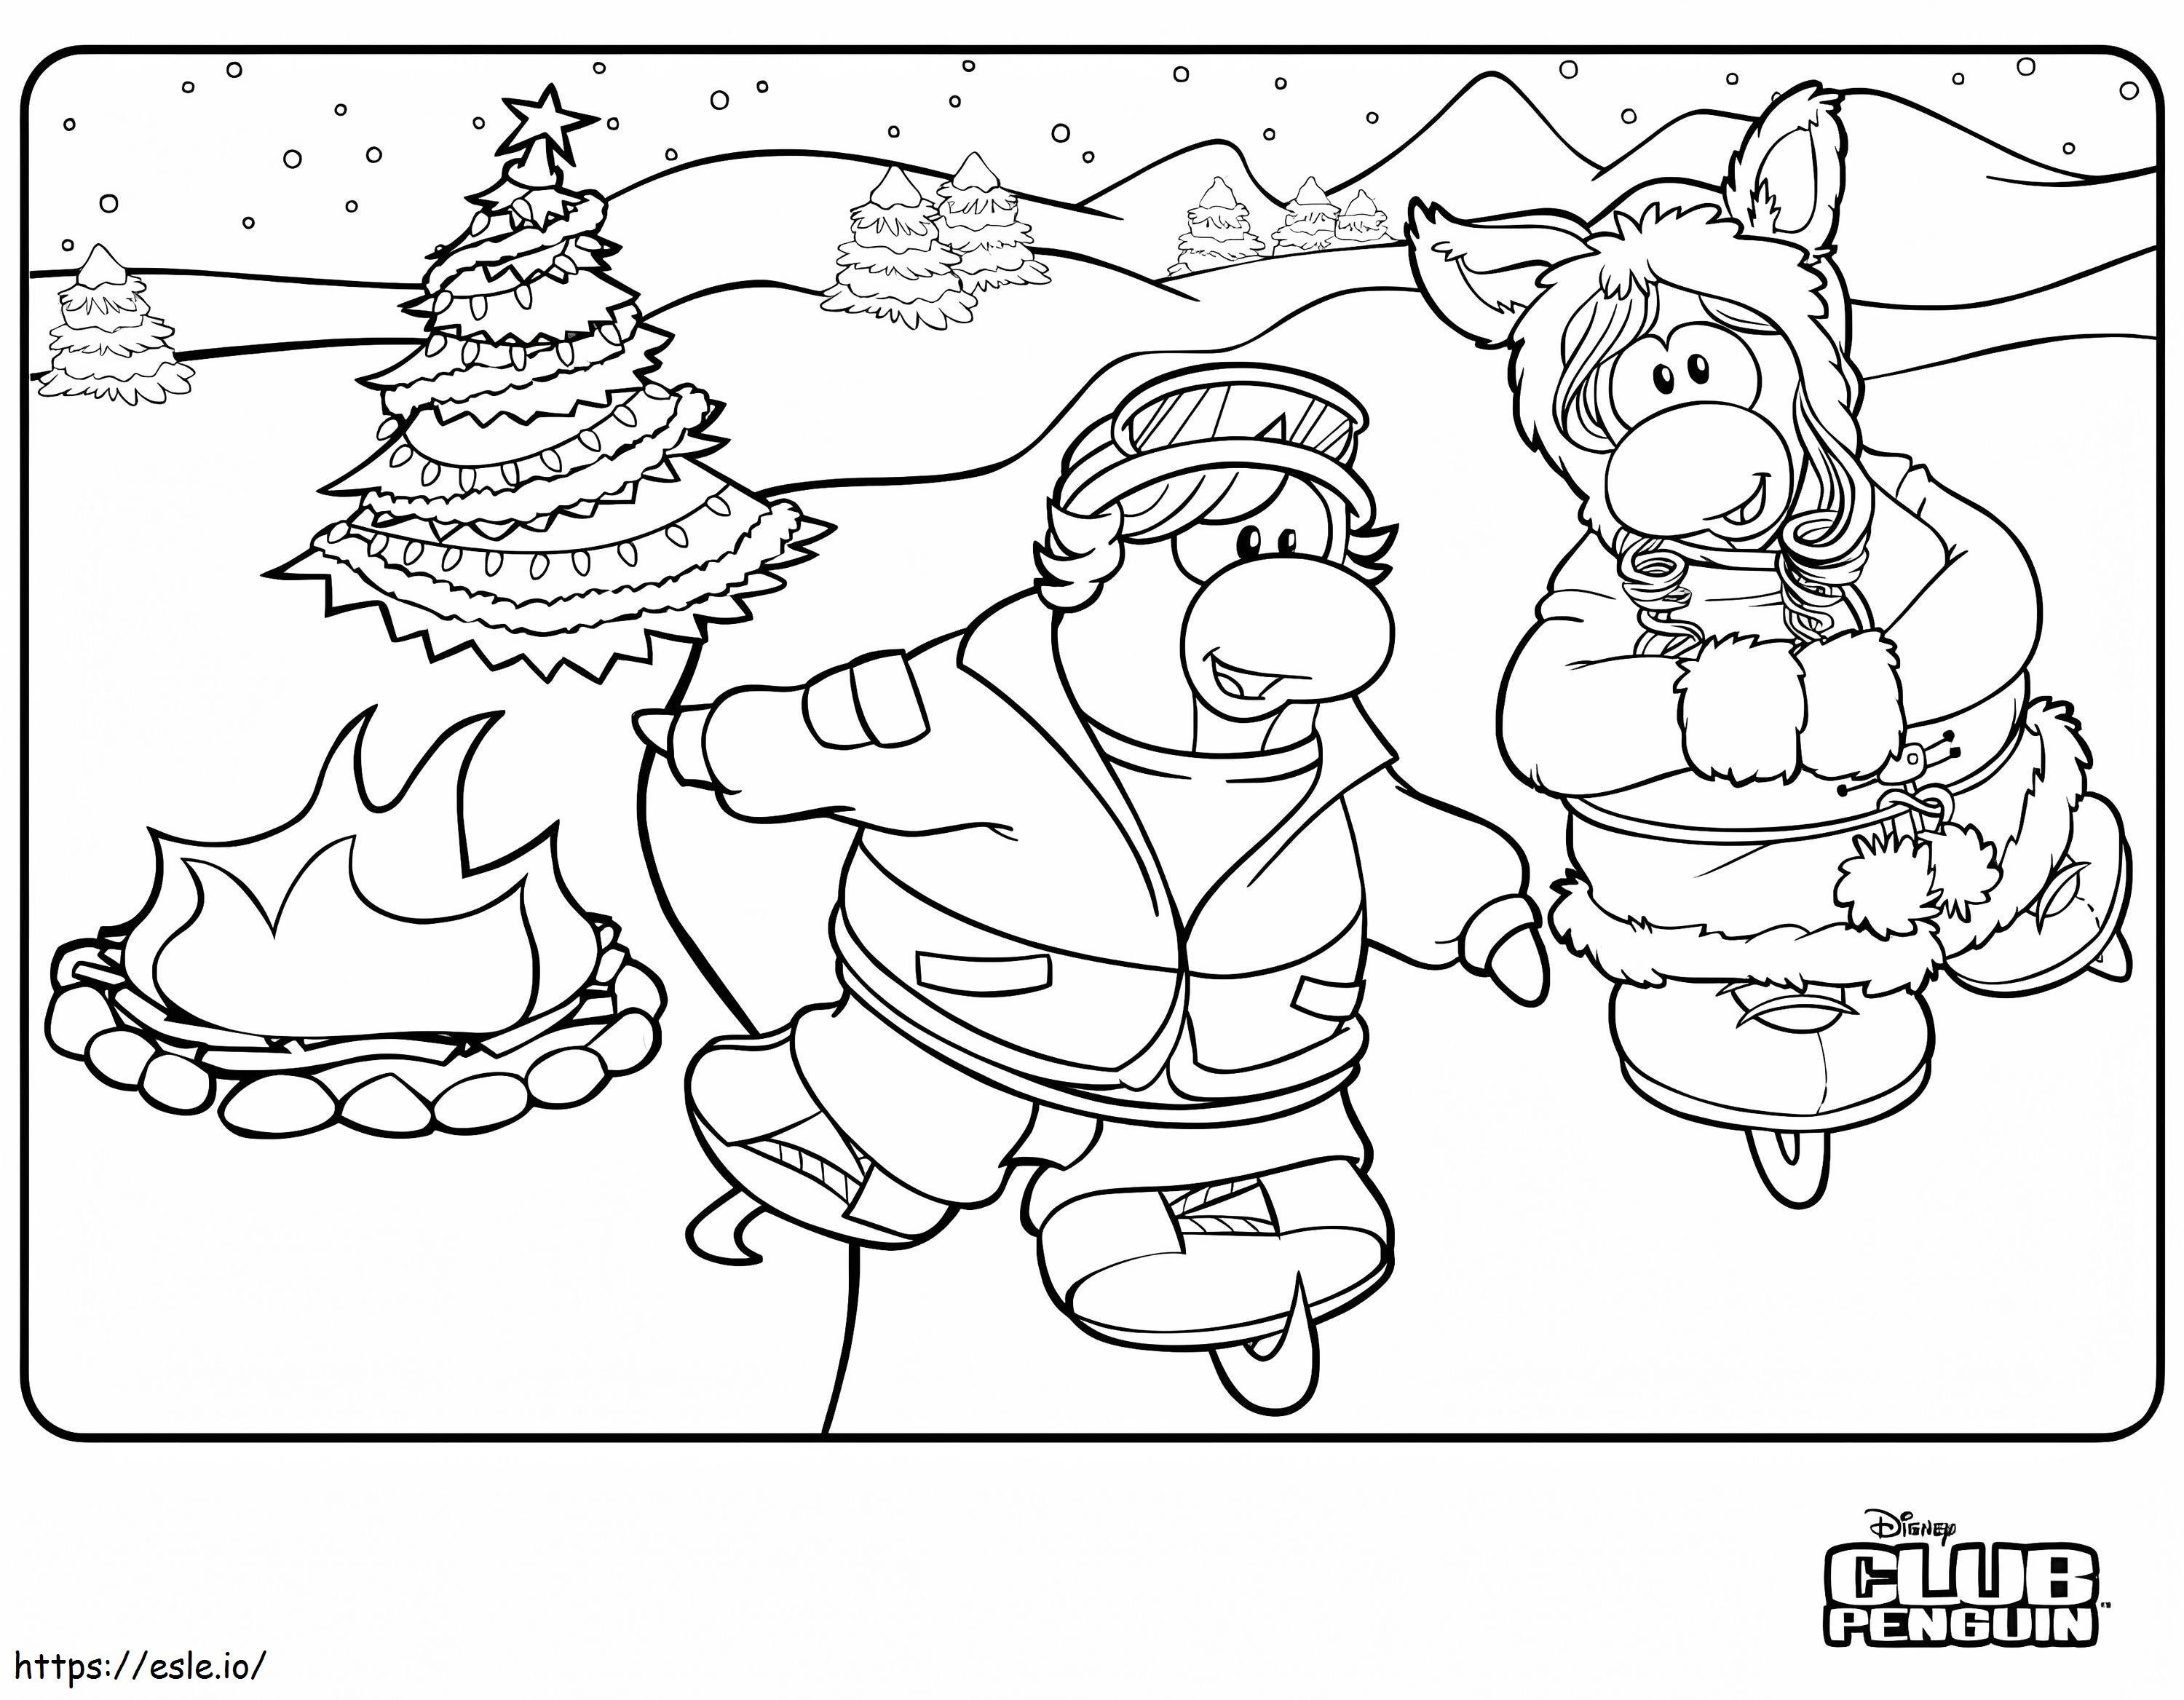 Club Penguin Ice Skating coloring page